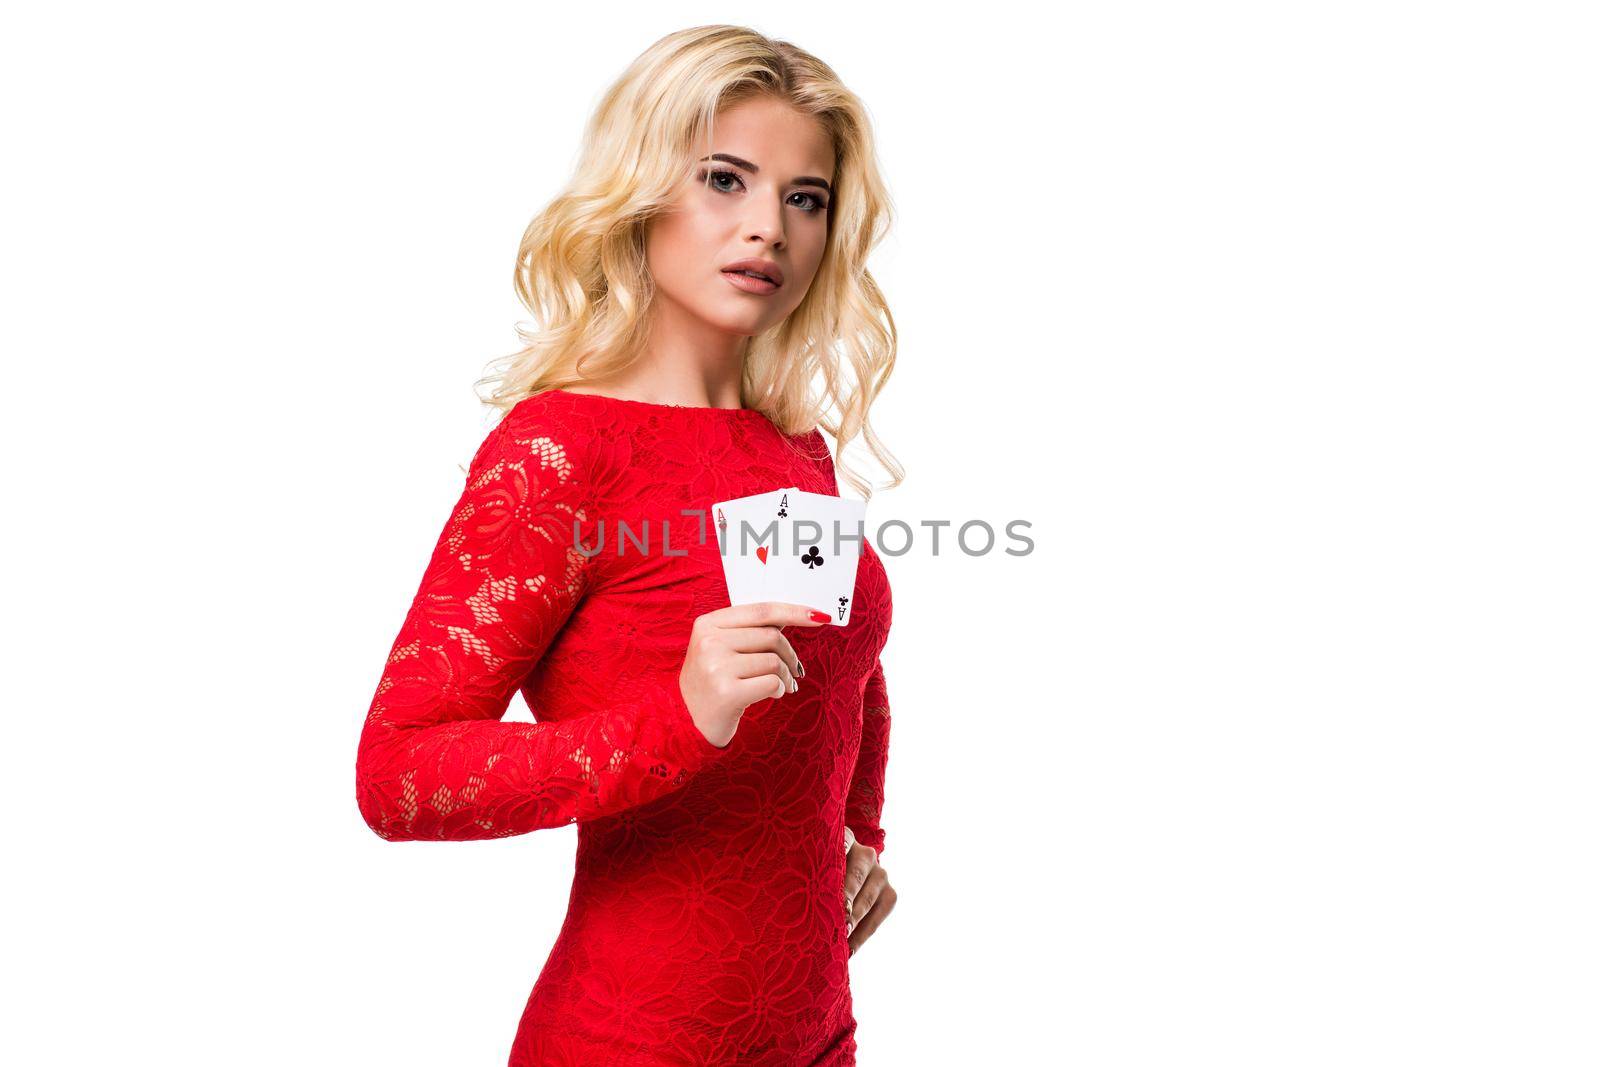 Caucasian young woman with long light blonde hair in evening outfit holding playing cards. Isolated. Poker by nazarovsergey